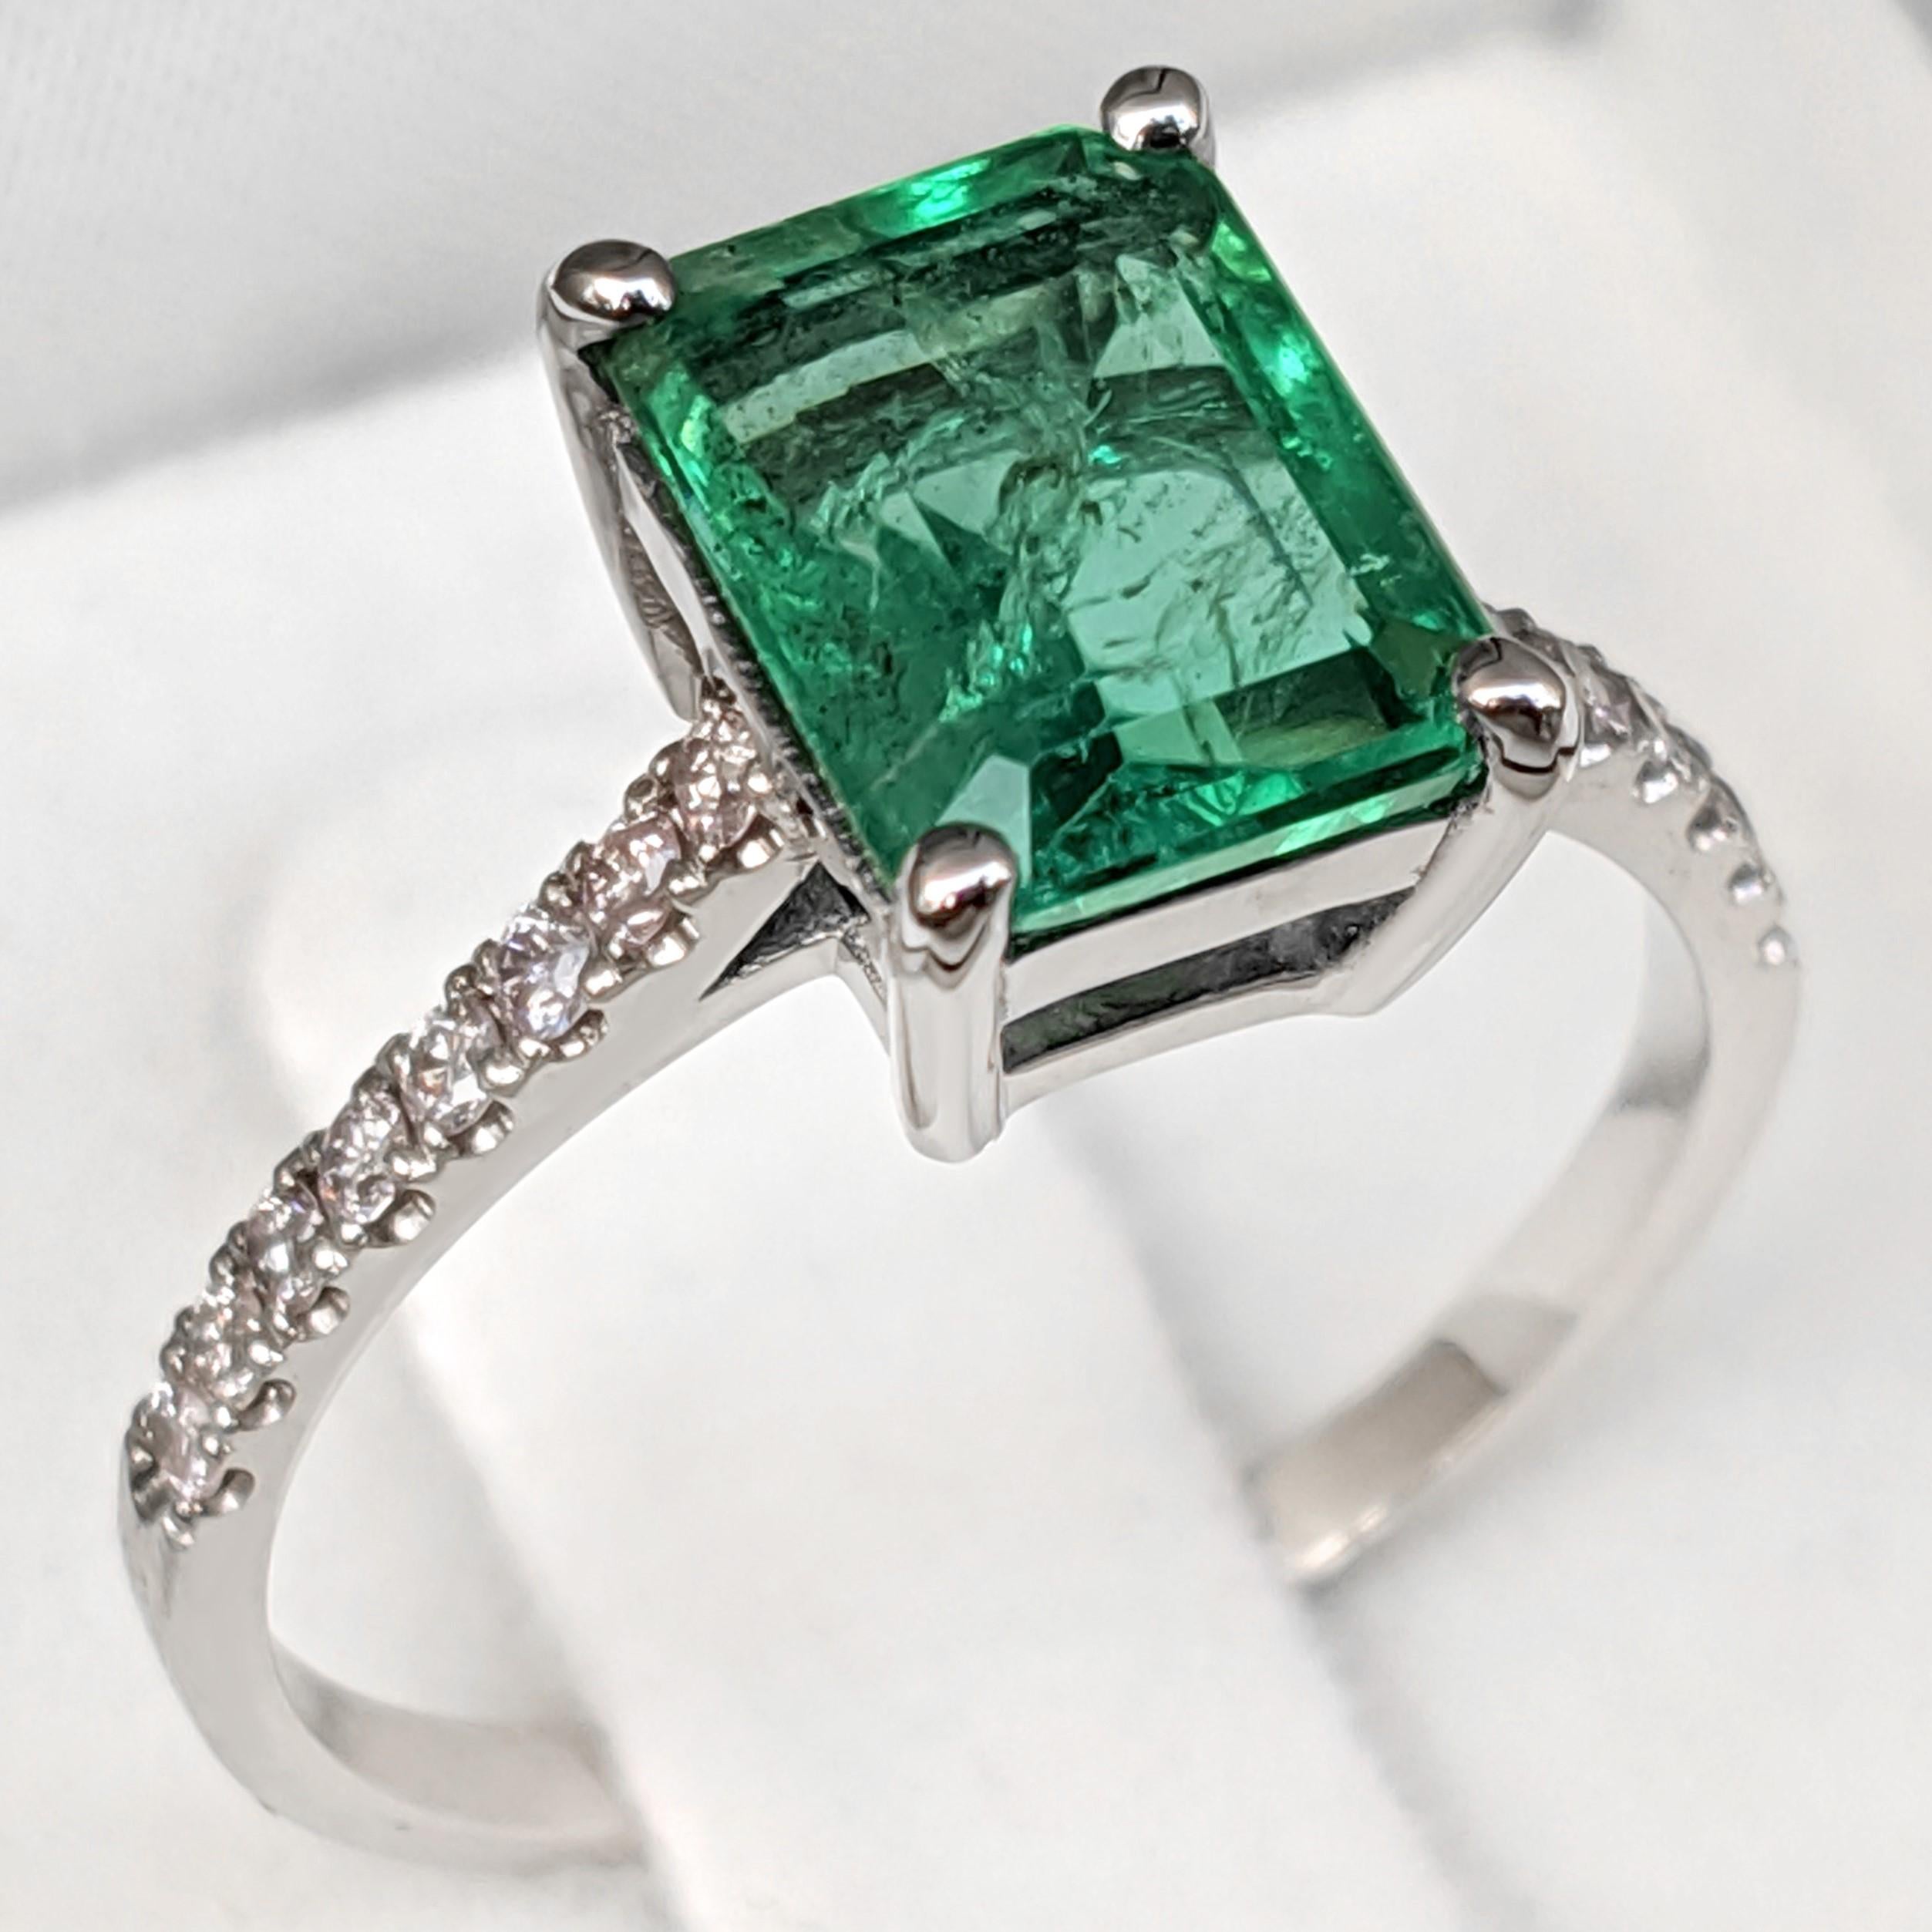 Women's NO RESERVE! 2.27 Carat Emerald and 0.21Ct Diamonds - 14 kt. White gold - Ring